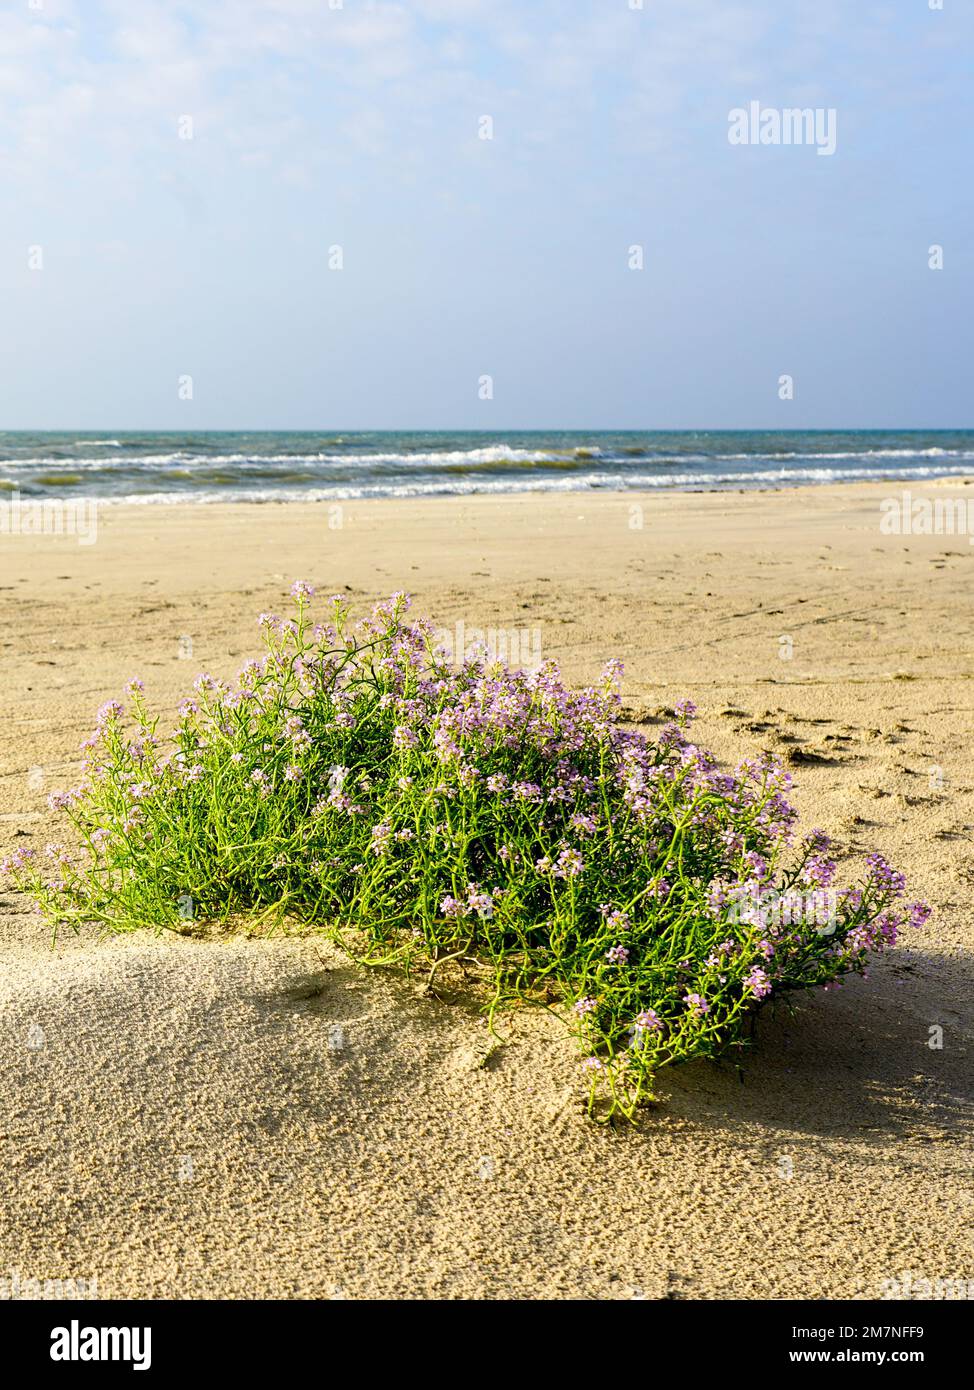 Cakile Maritima clump, known as the European sea rocket, blooming with purple flowers on a sandy Baltic Sea beach Stock Photo